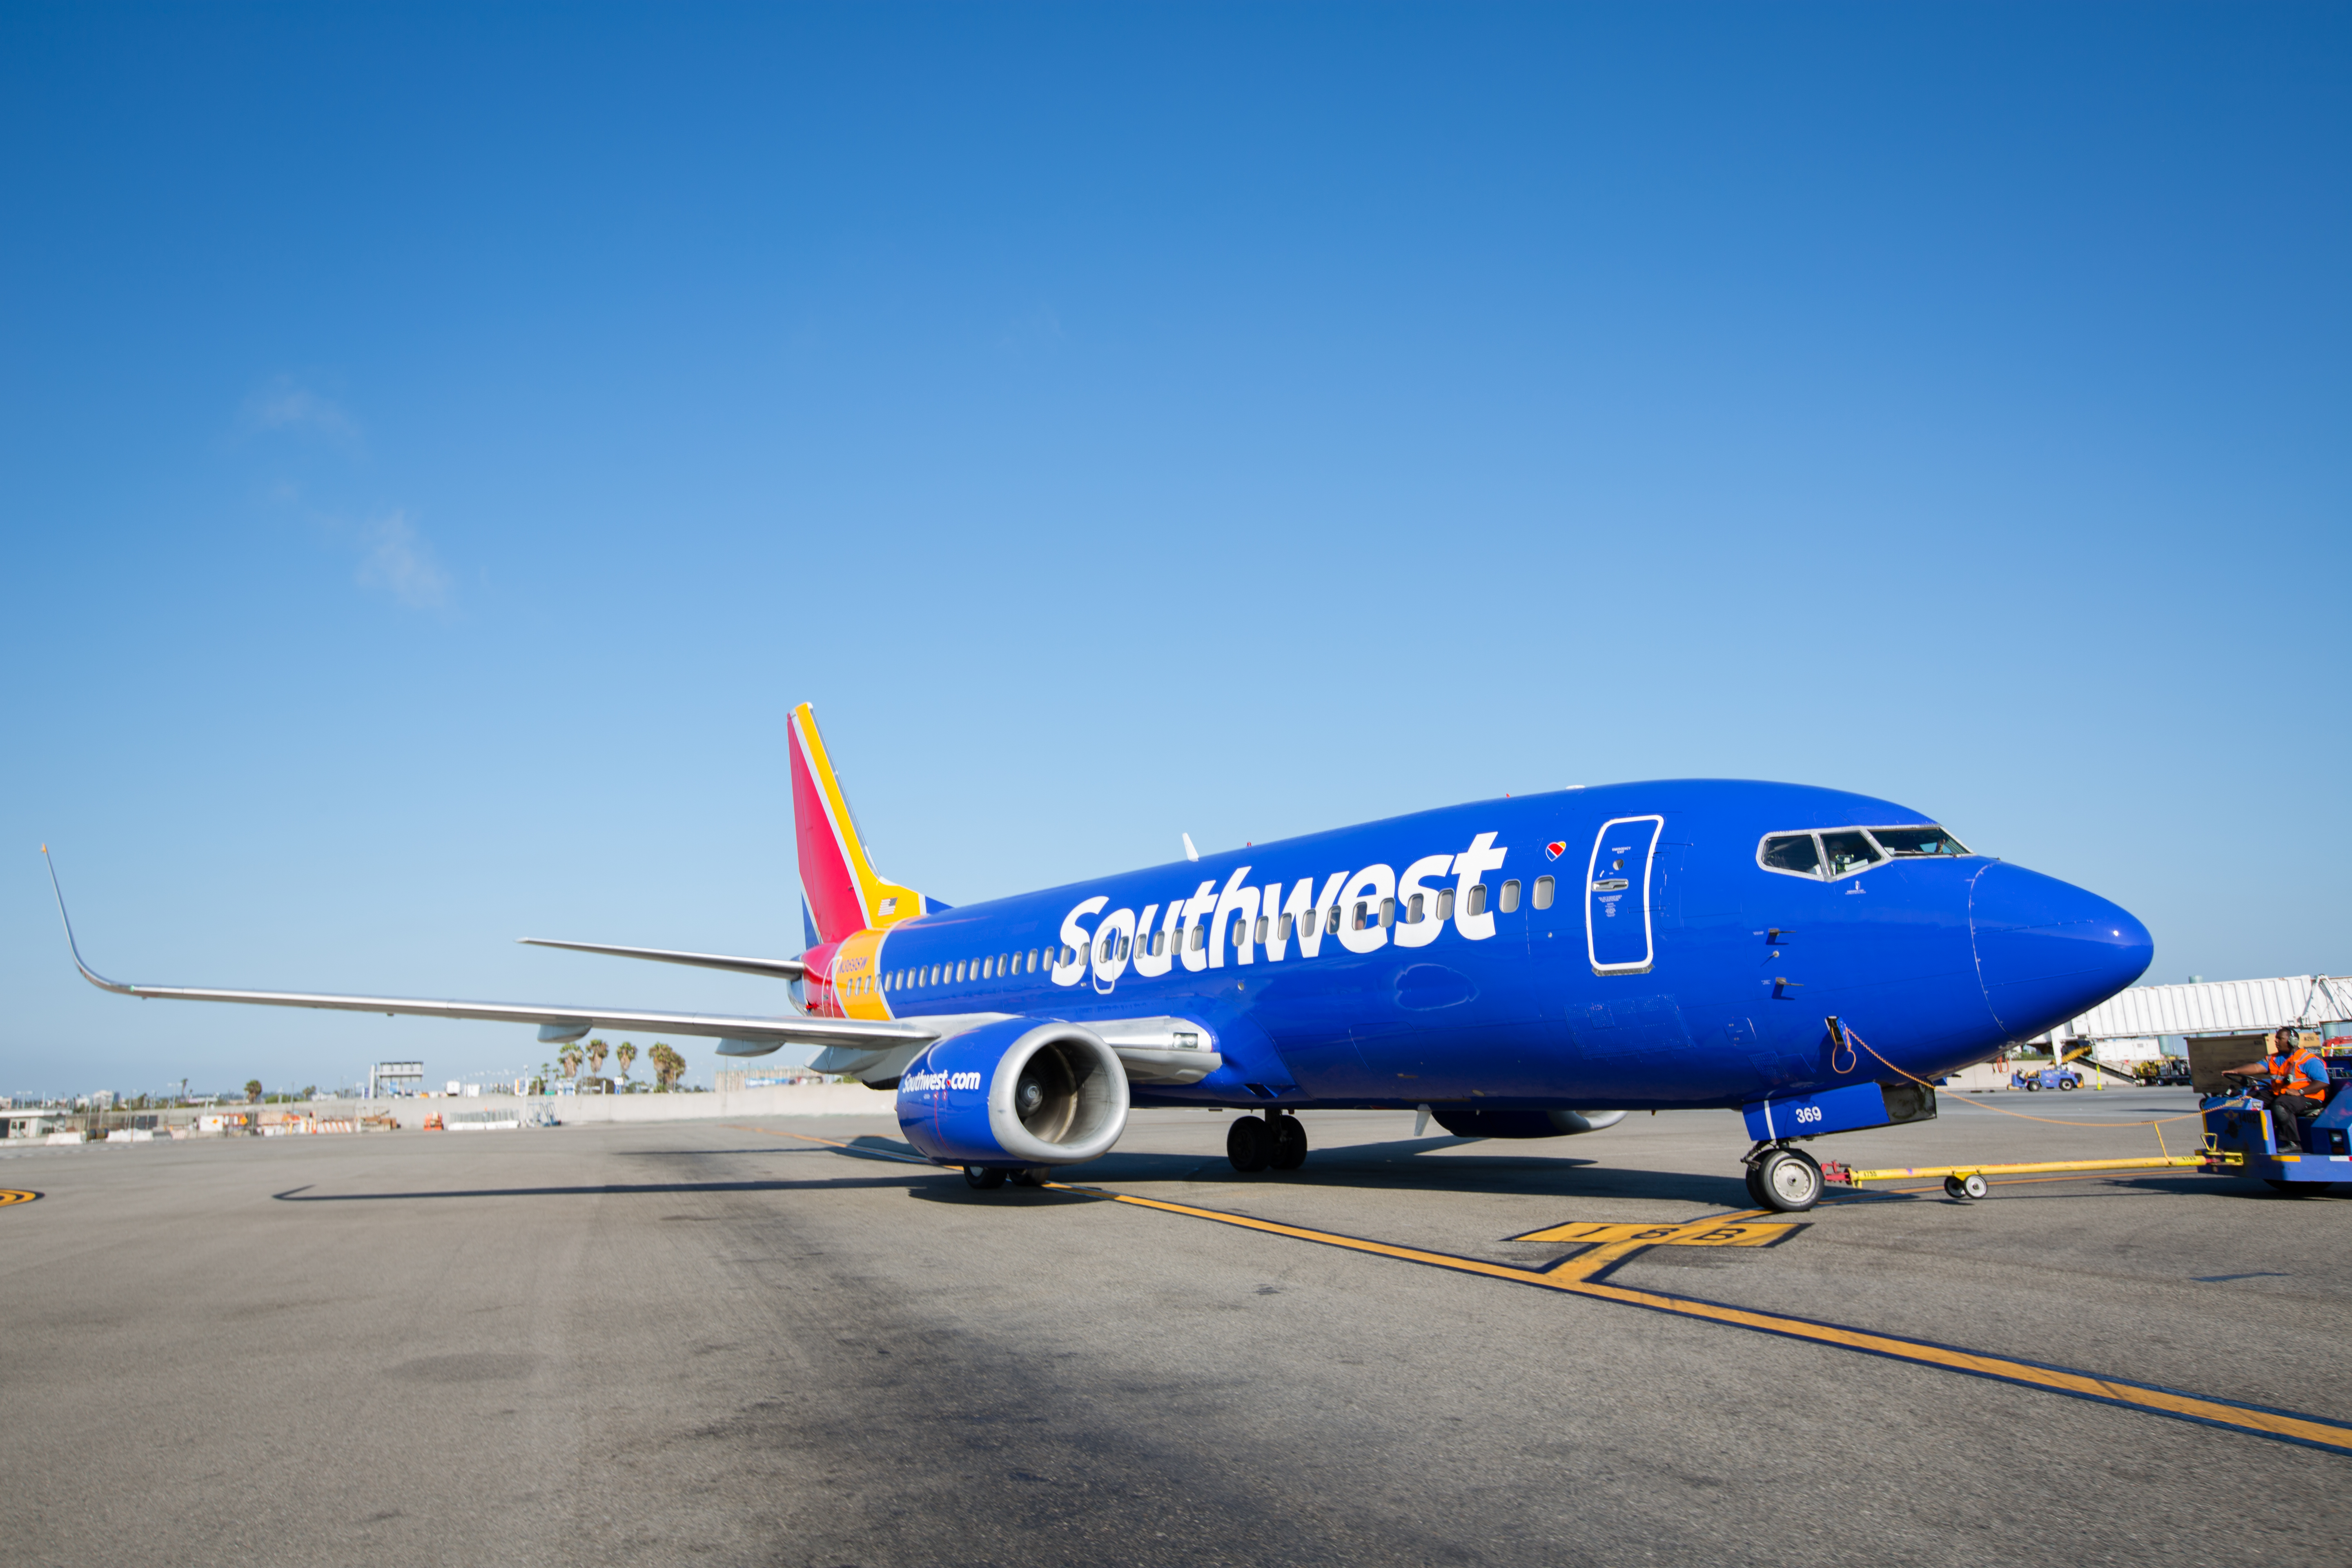 Case Study: How Southwest Airlines used art and science to increase demand ...